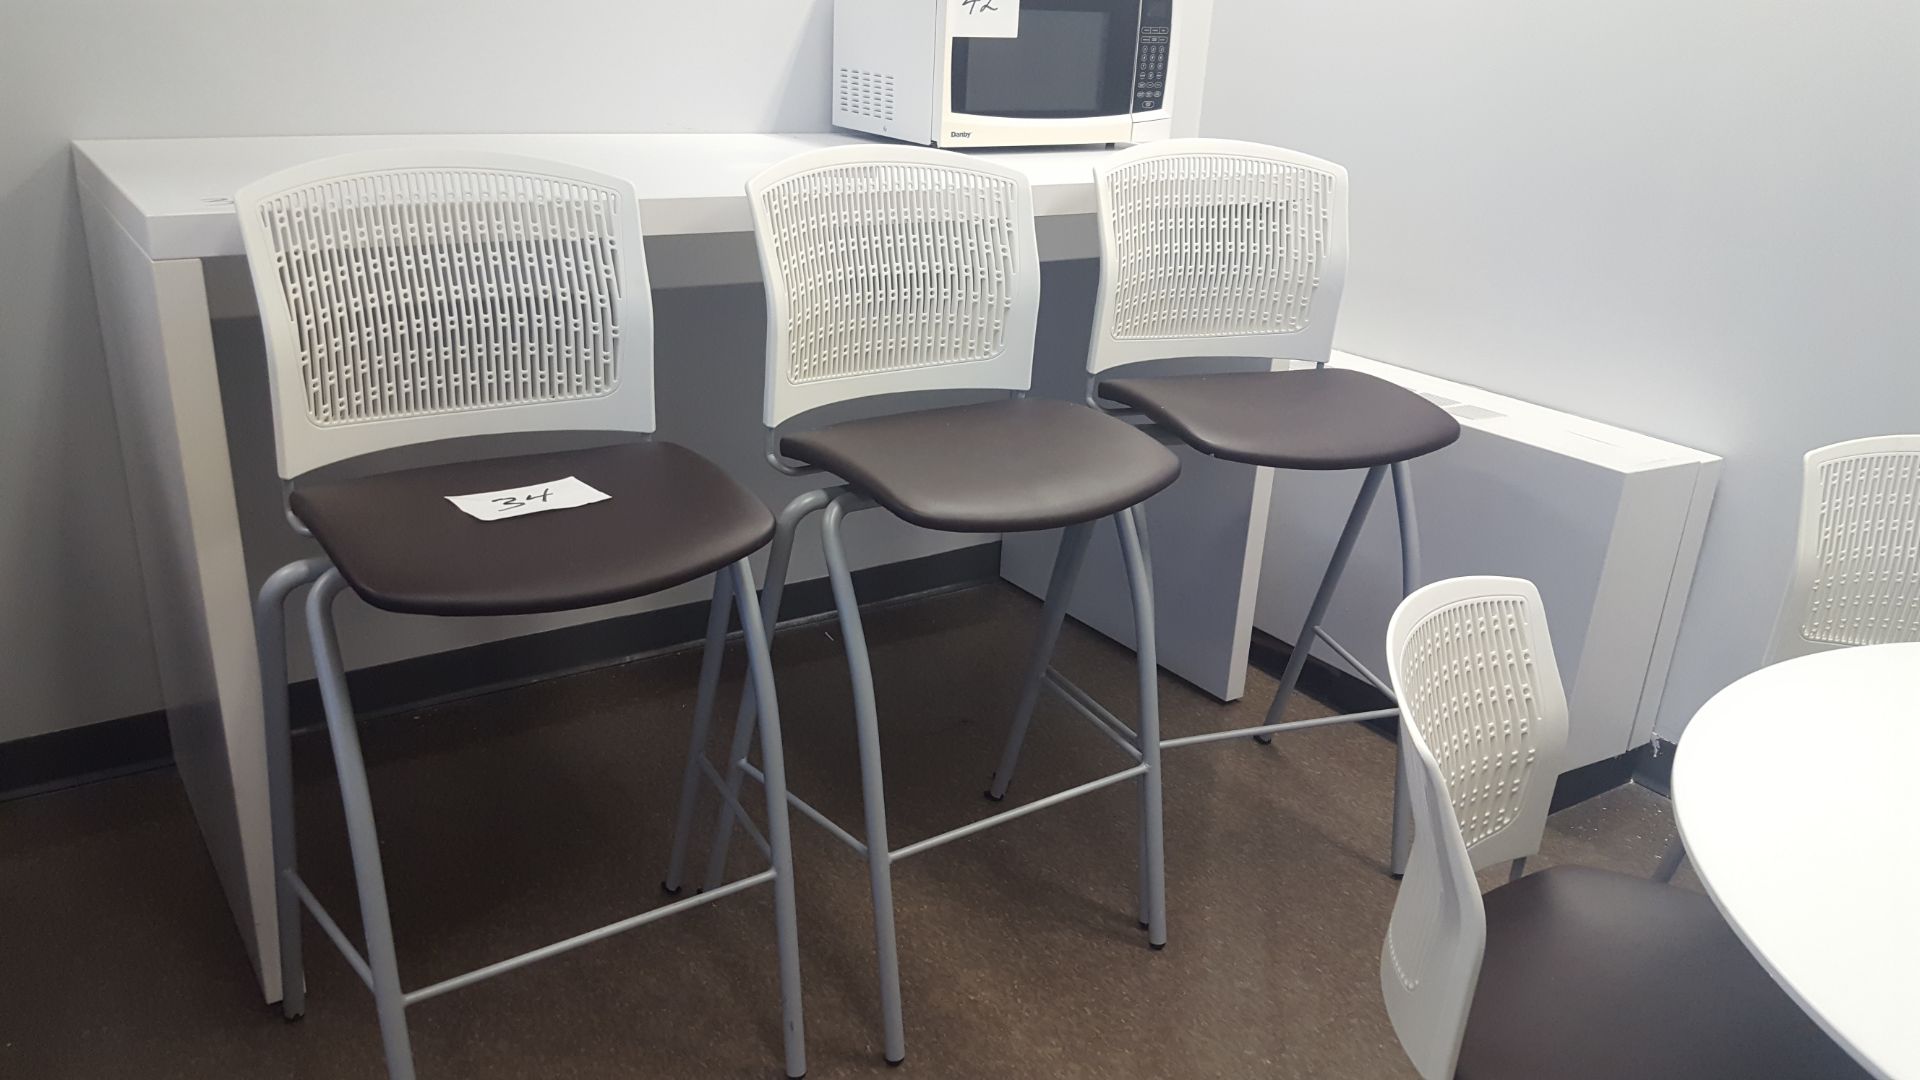 White and Black Stools - Image 2 of 3